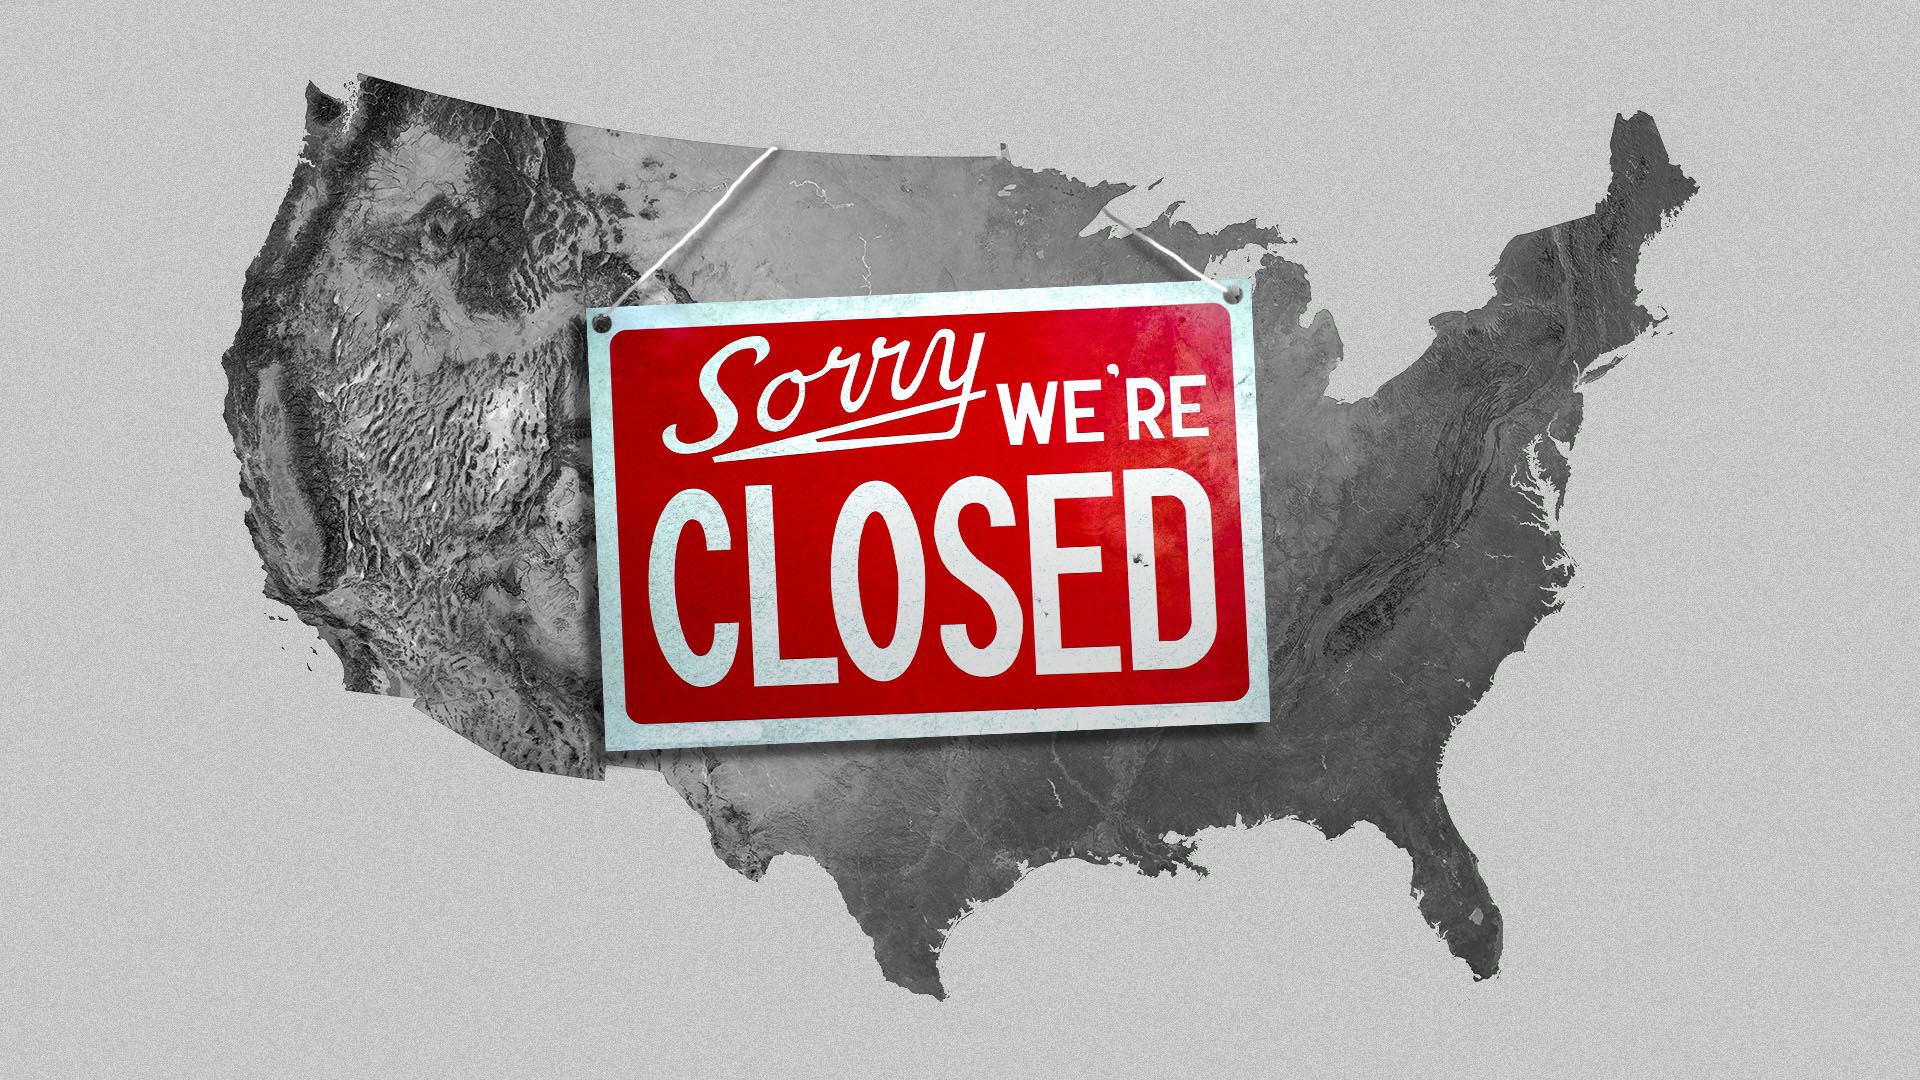 Illustration of a map of the United States with a sign reading "sorry, we're closed" 